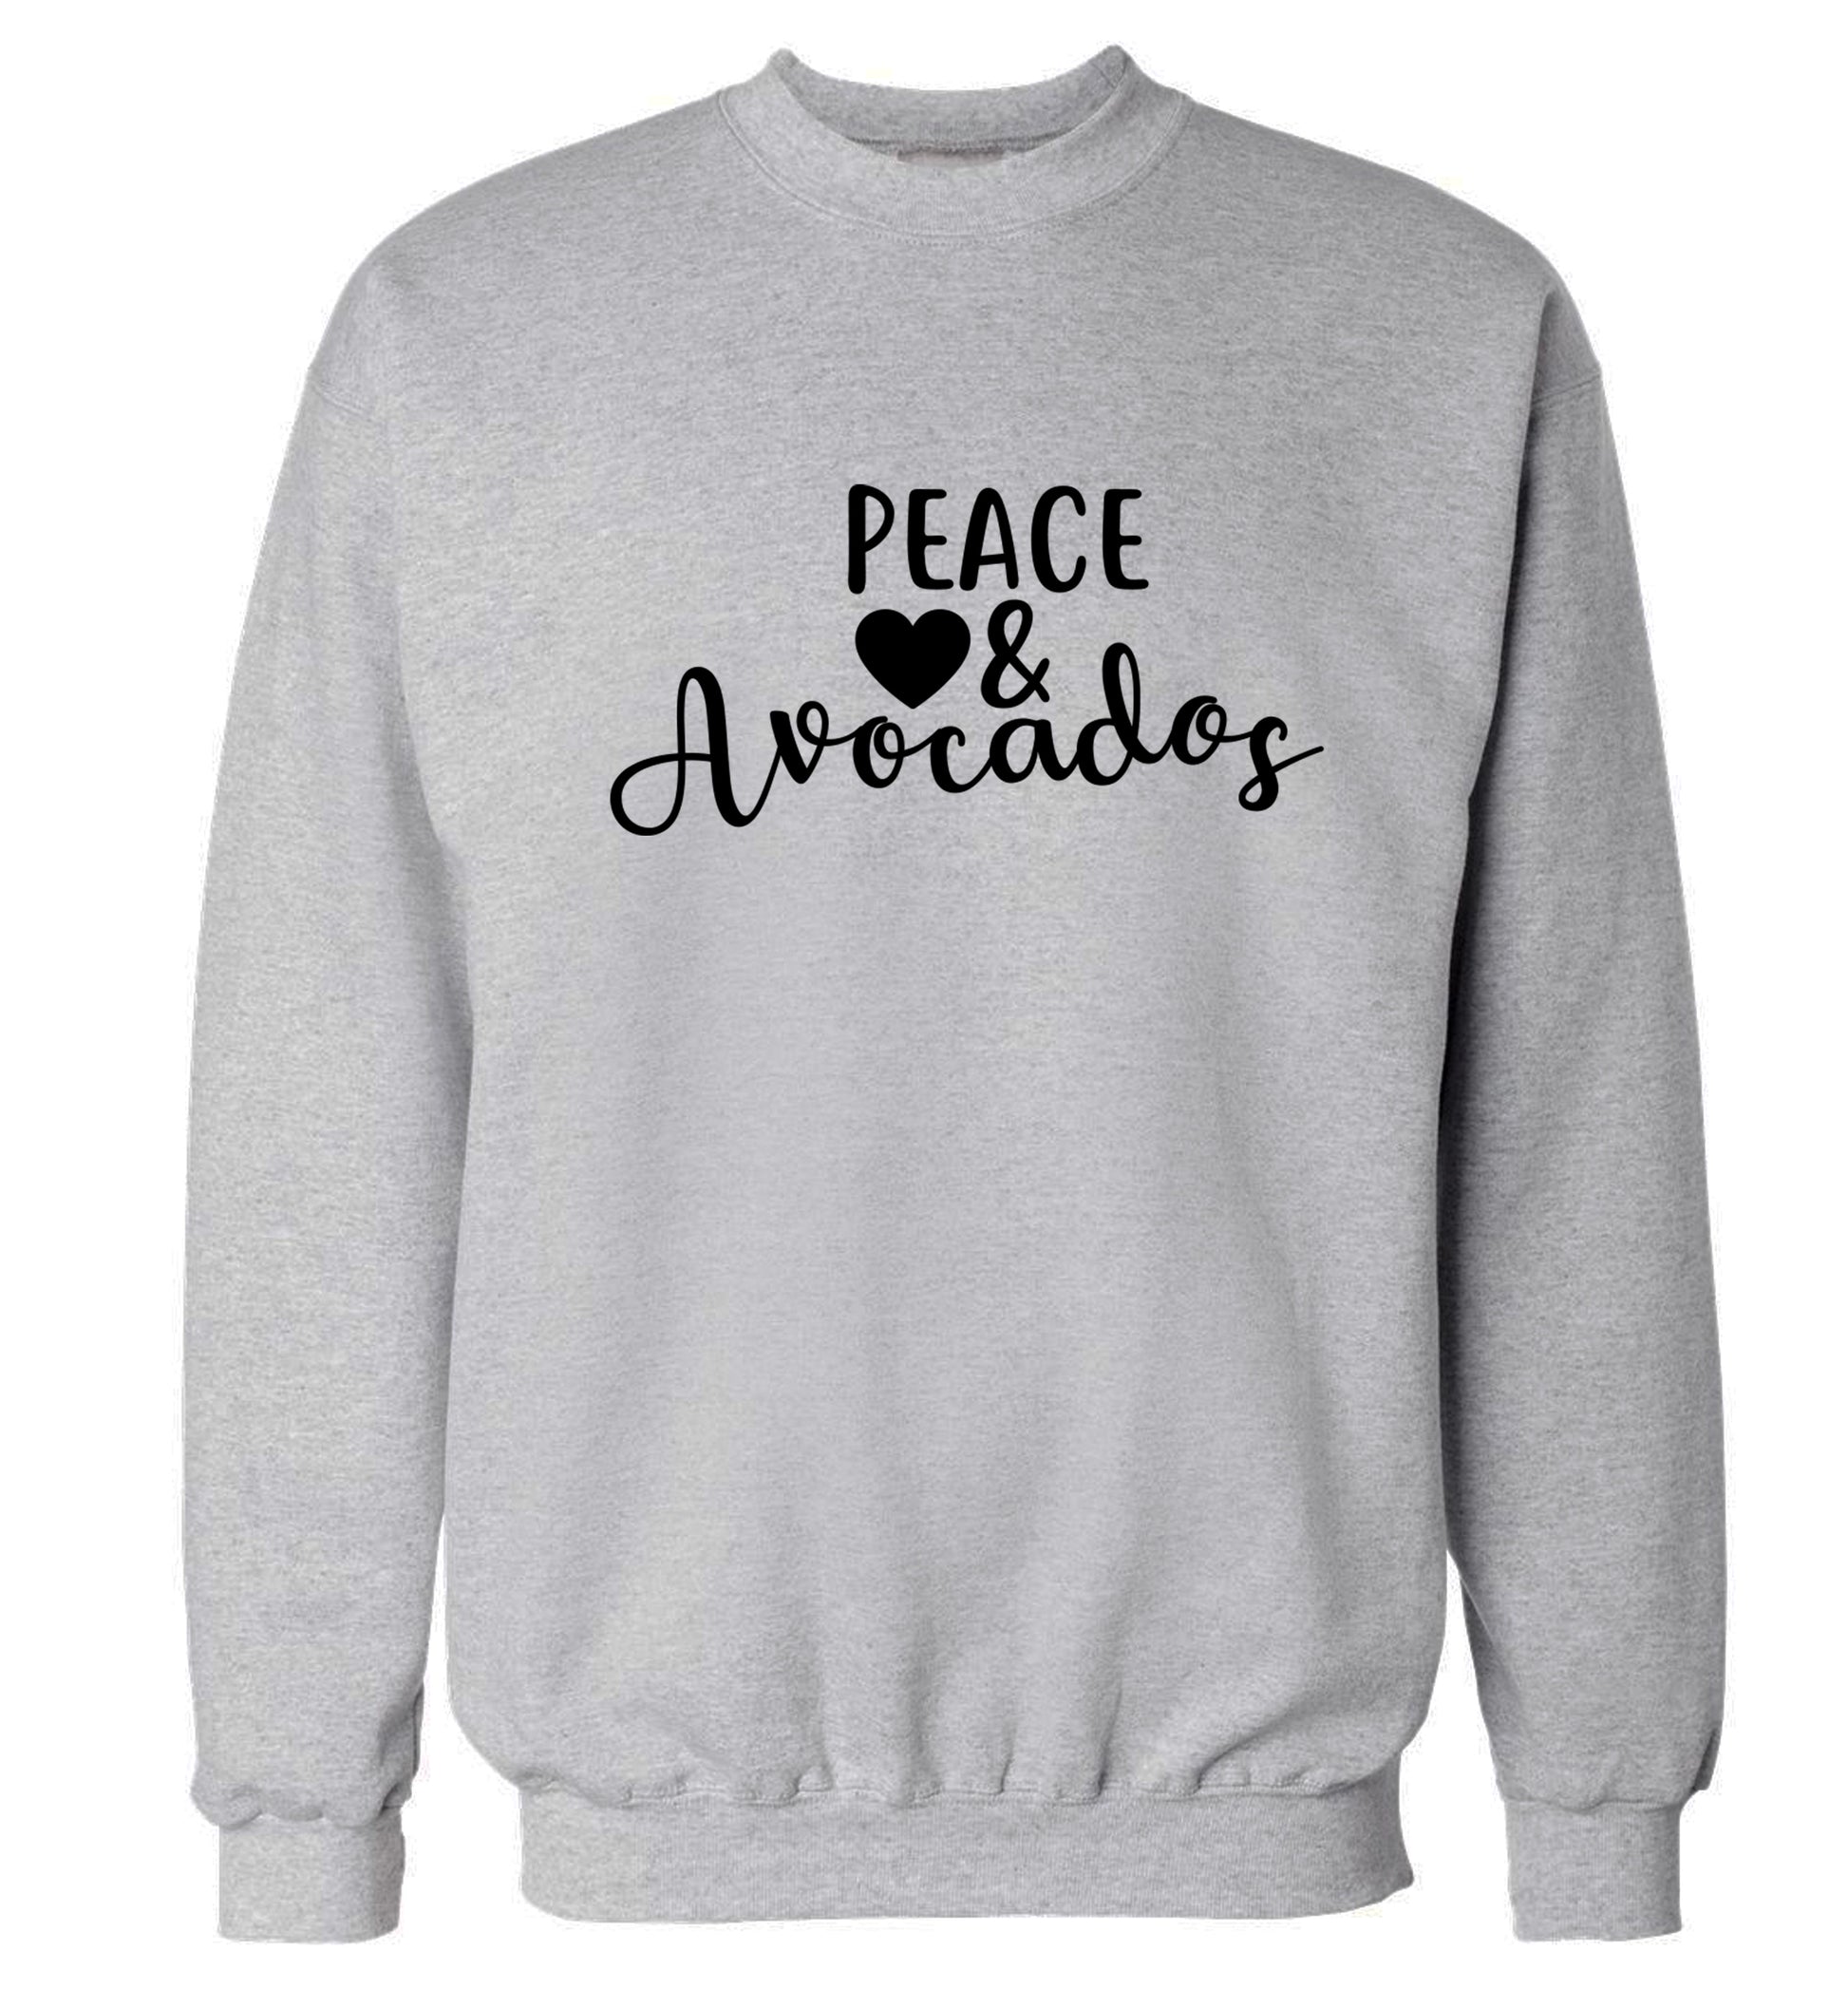 Peace love and avocados Adult's unisex grey Sweater 2XL